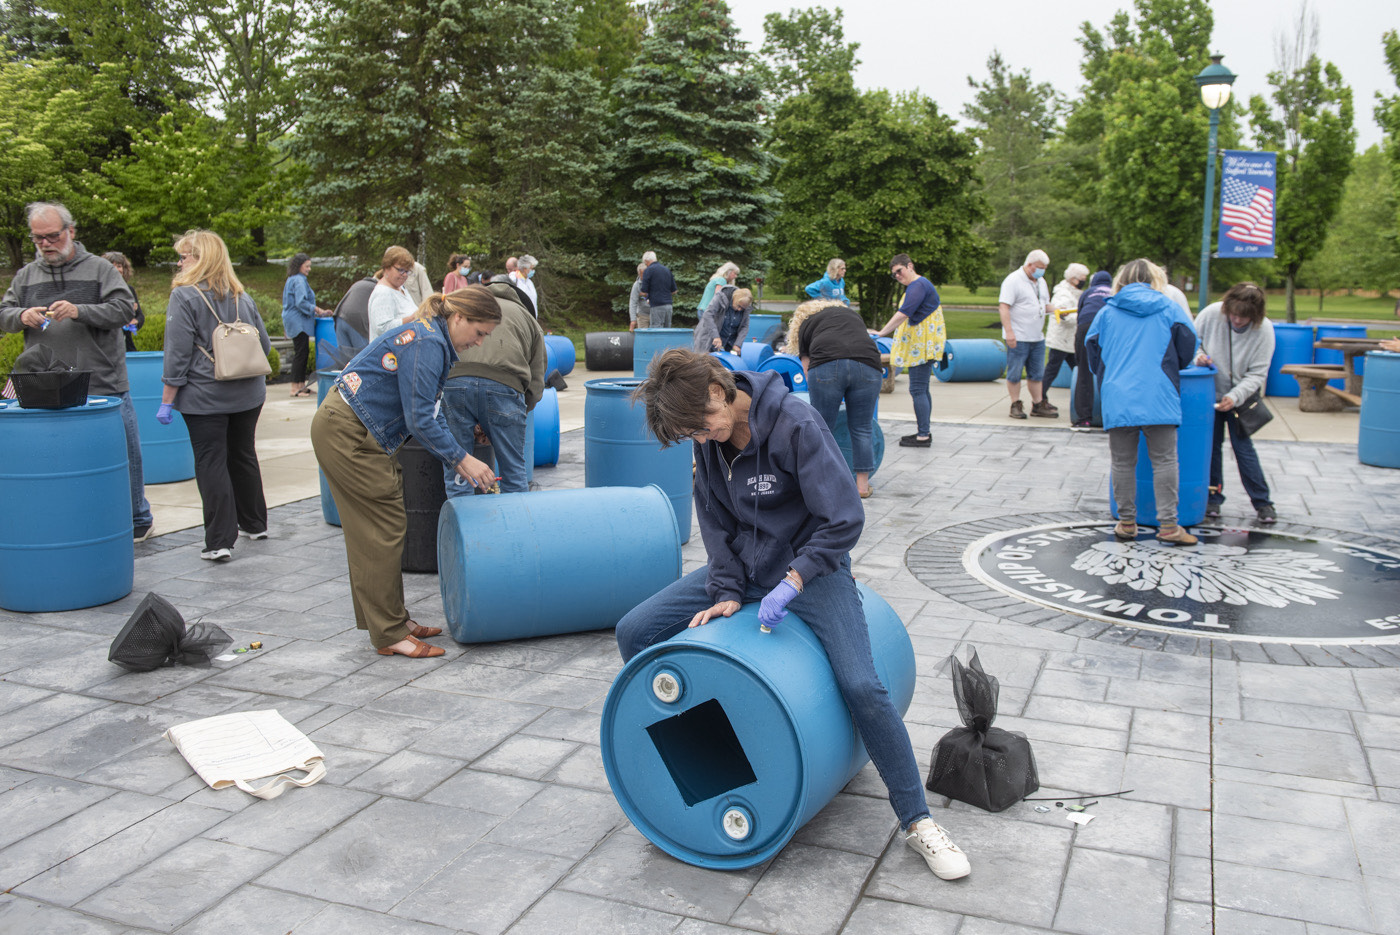 In the foreground, a person sits astride a large blue barrel; people cluster around other barrels in the background